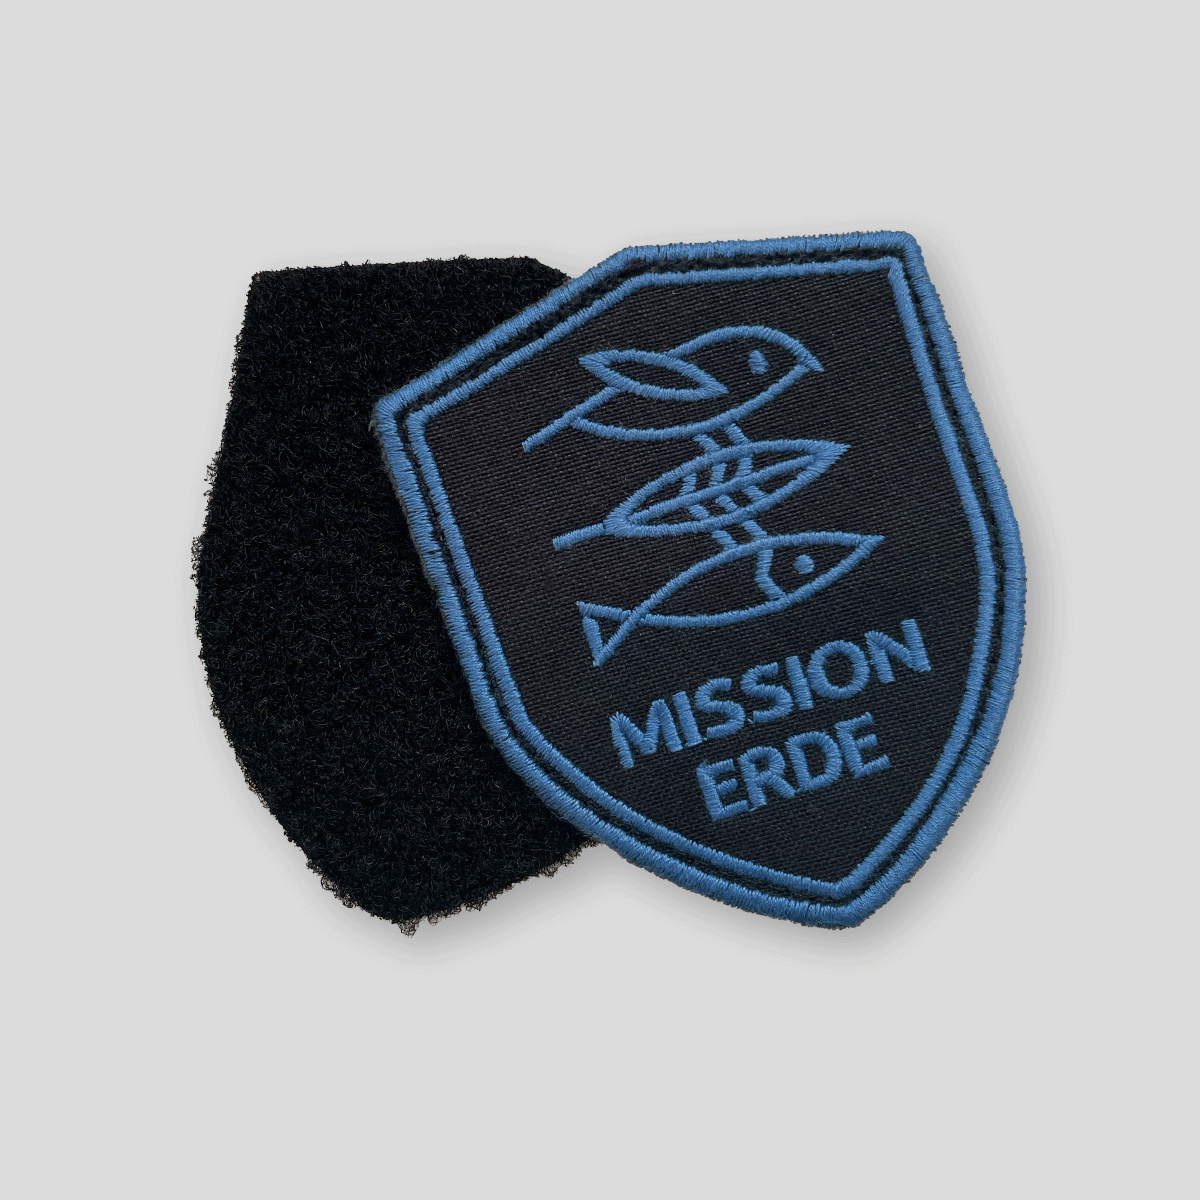 Patch "Mission Navy-Seal Blue"